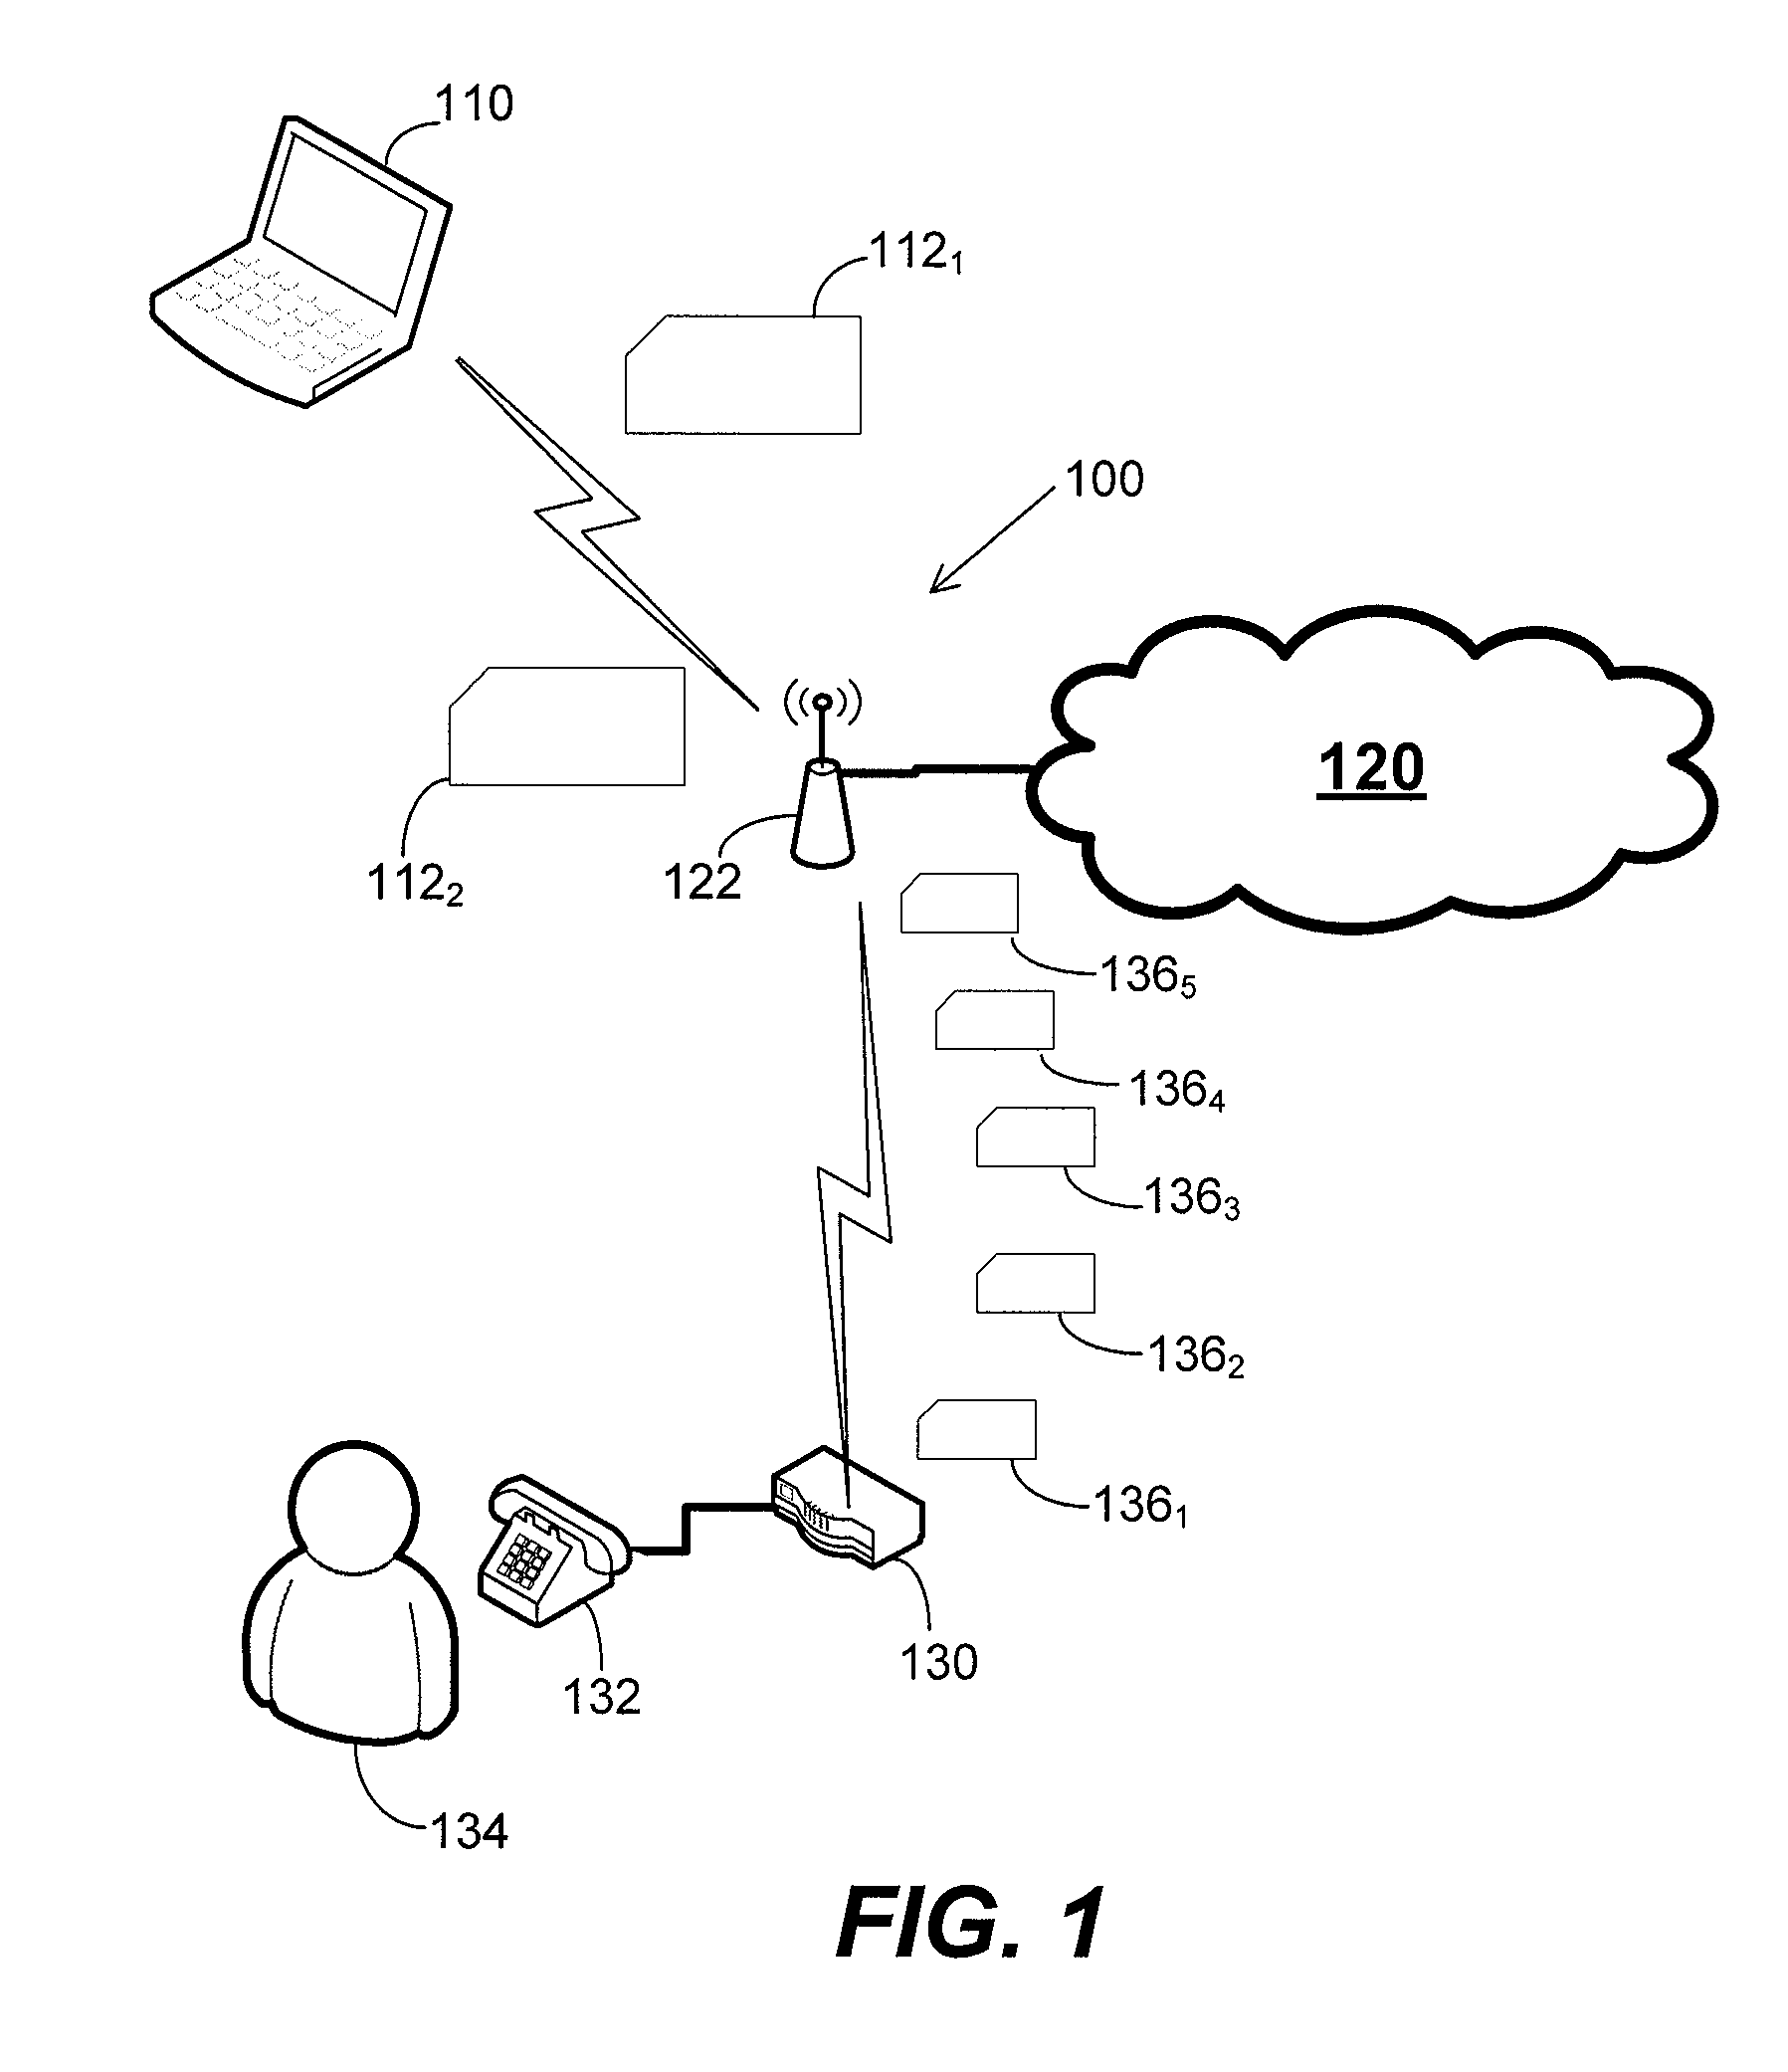 Orthogonal frequency division multiple access with carrier sense